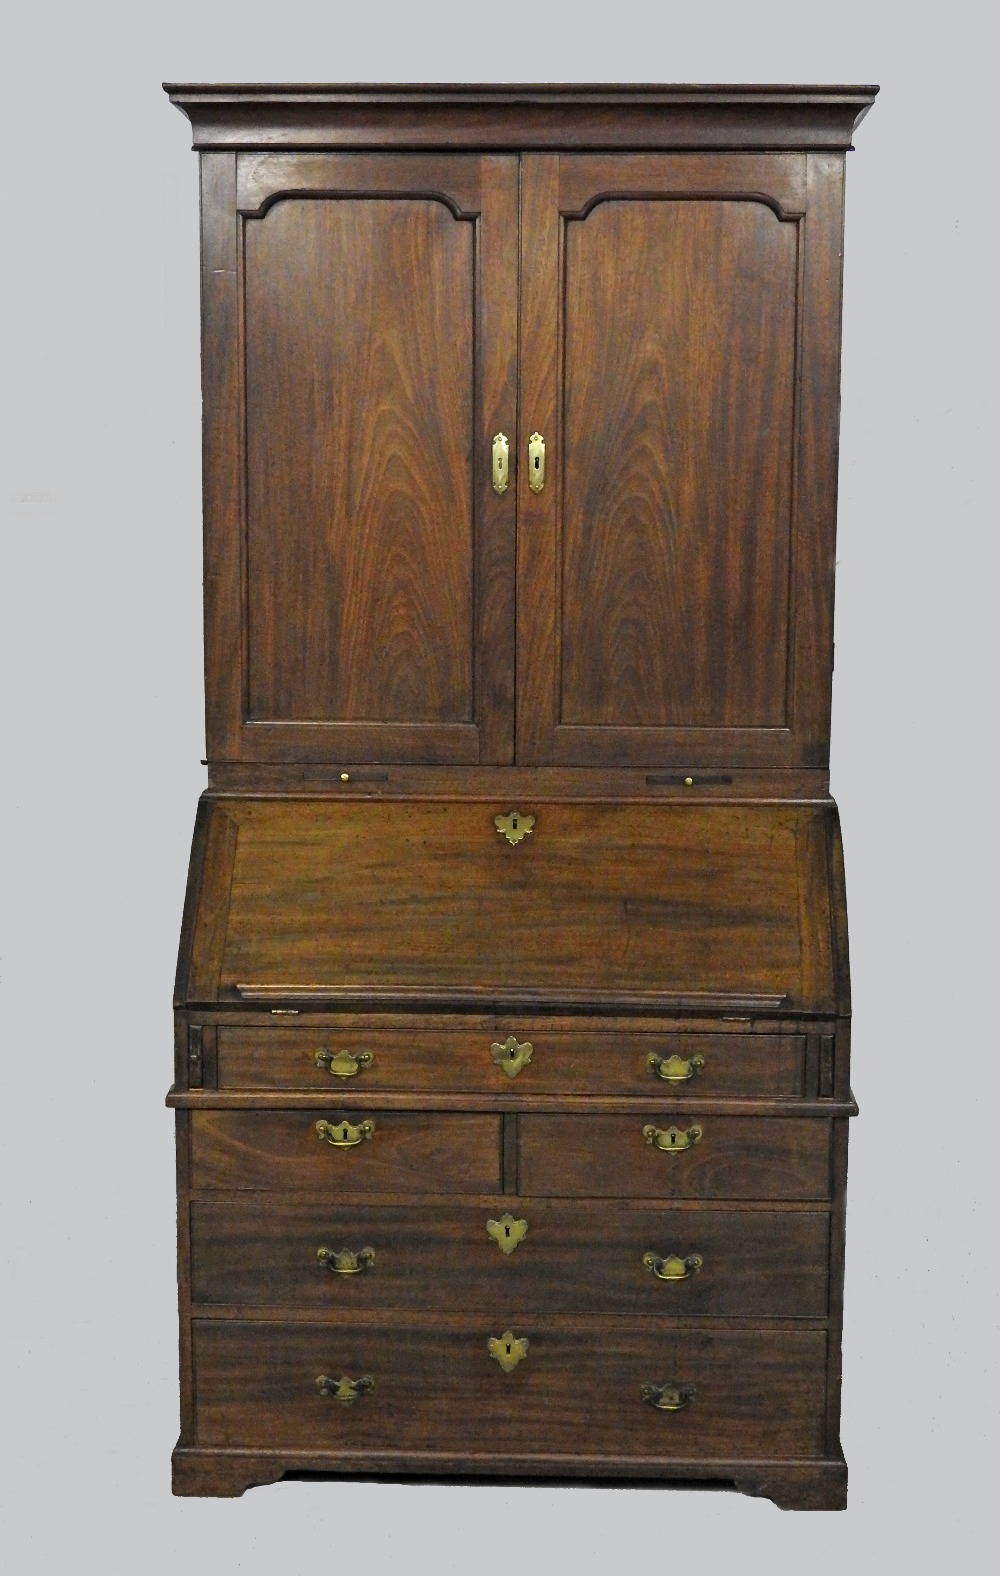 A George II mahogany bureau cabinet, the upper section with two arched panel doors,